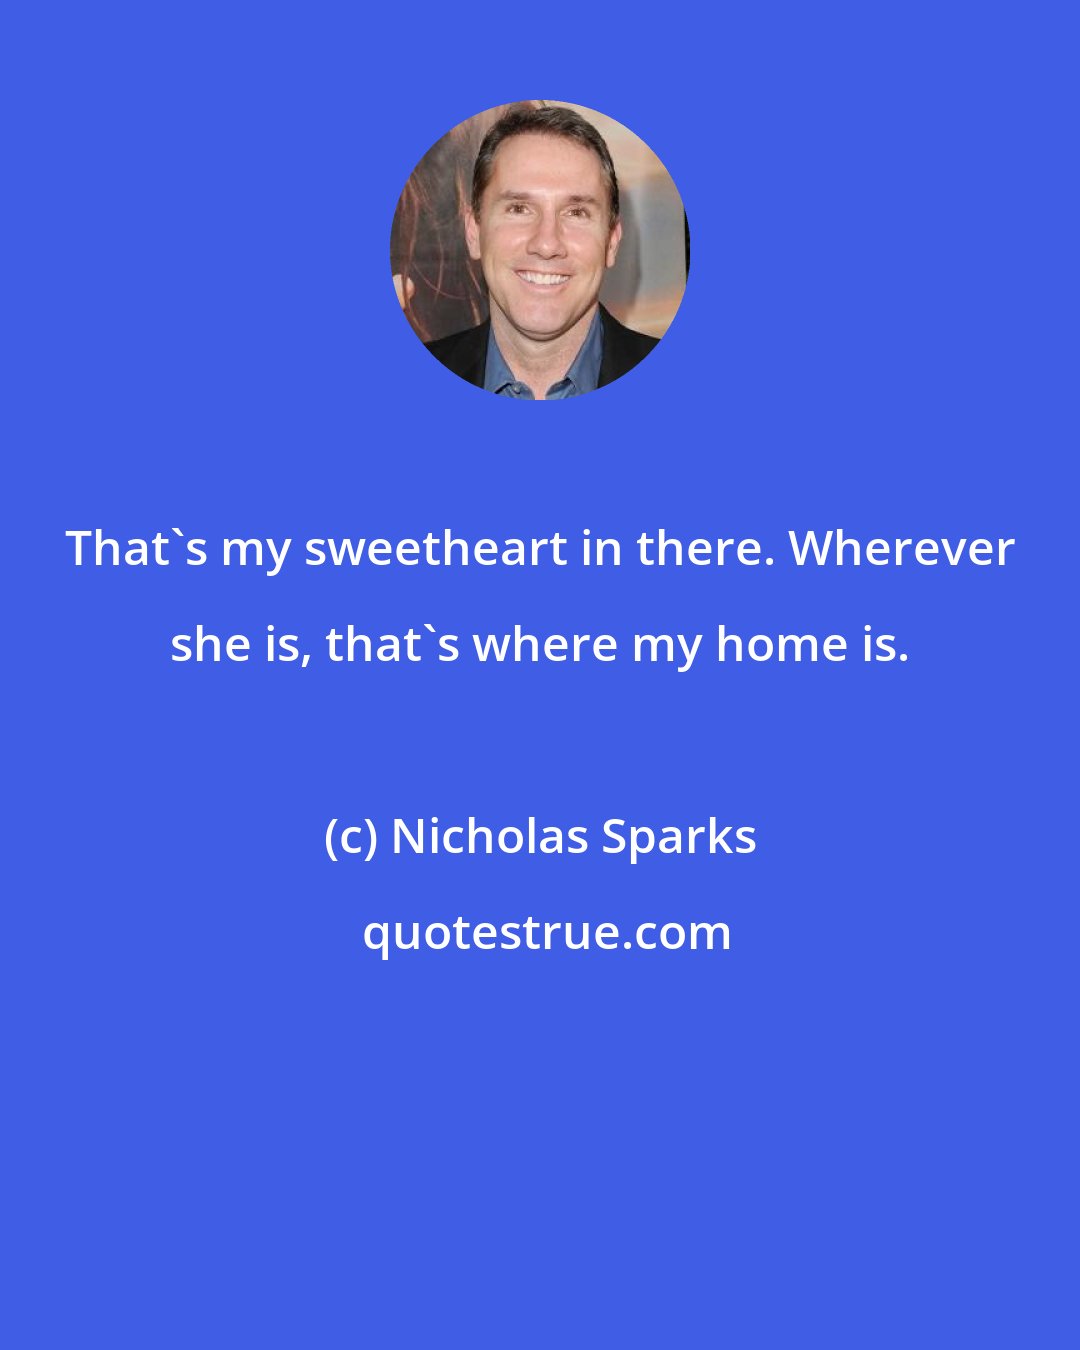 Nicholas Sparks: That's my sweetheart in there. Wherever she is, that's where my home is.